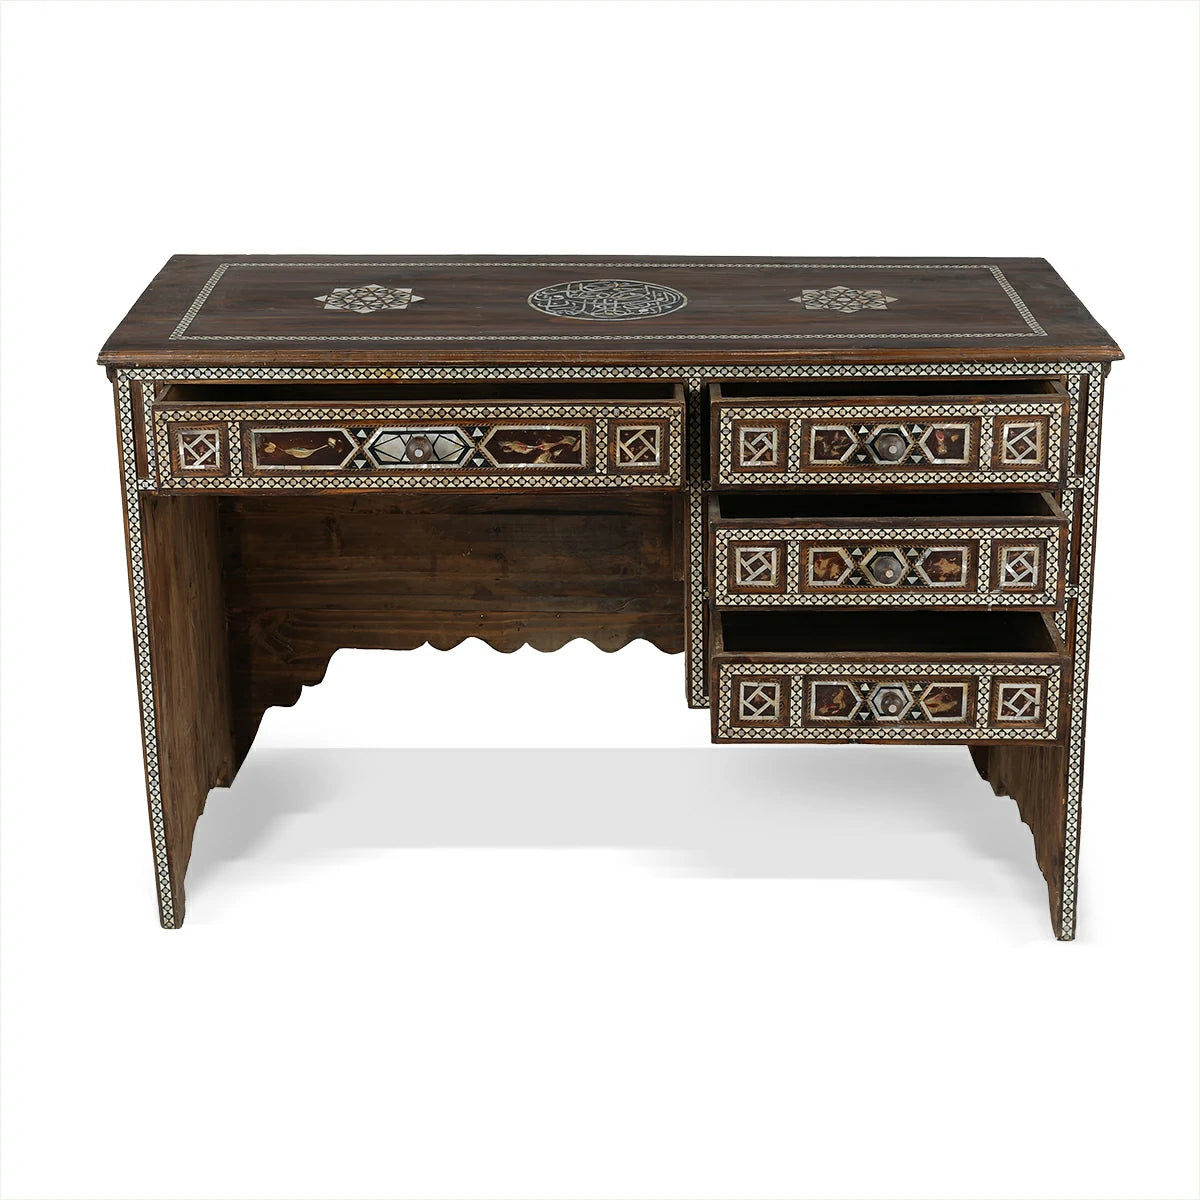 Back View of Arabian Calligraphic Design Desk With Open Drawers